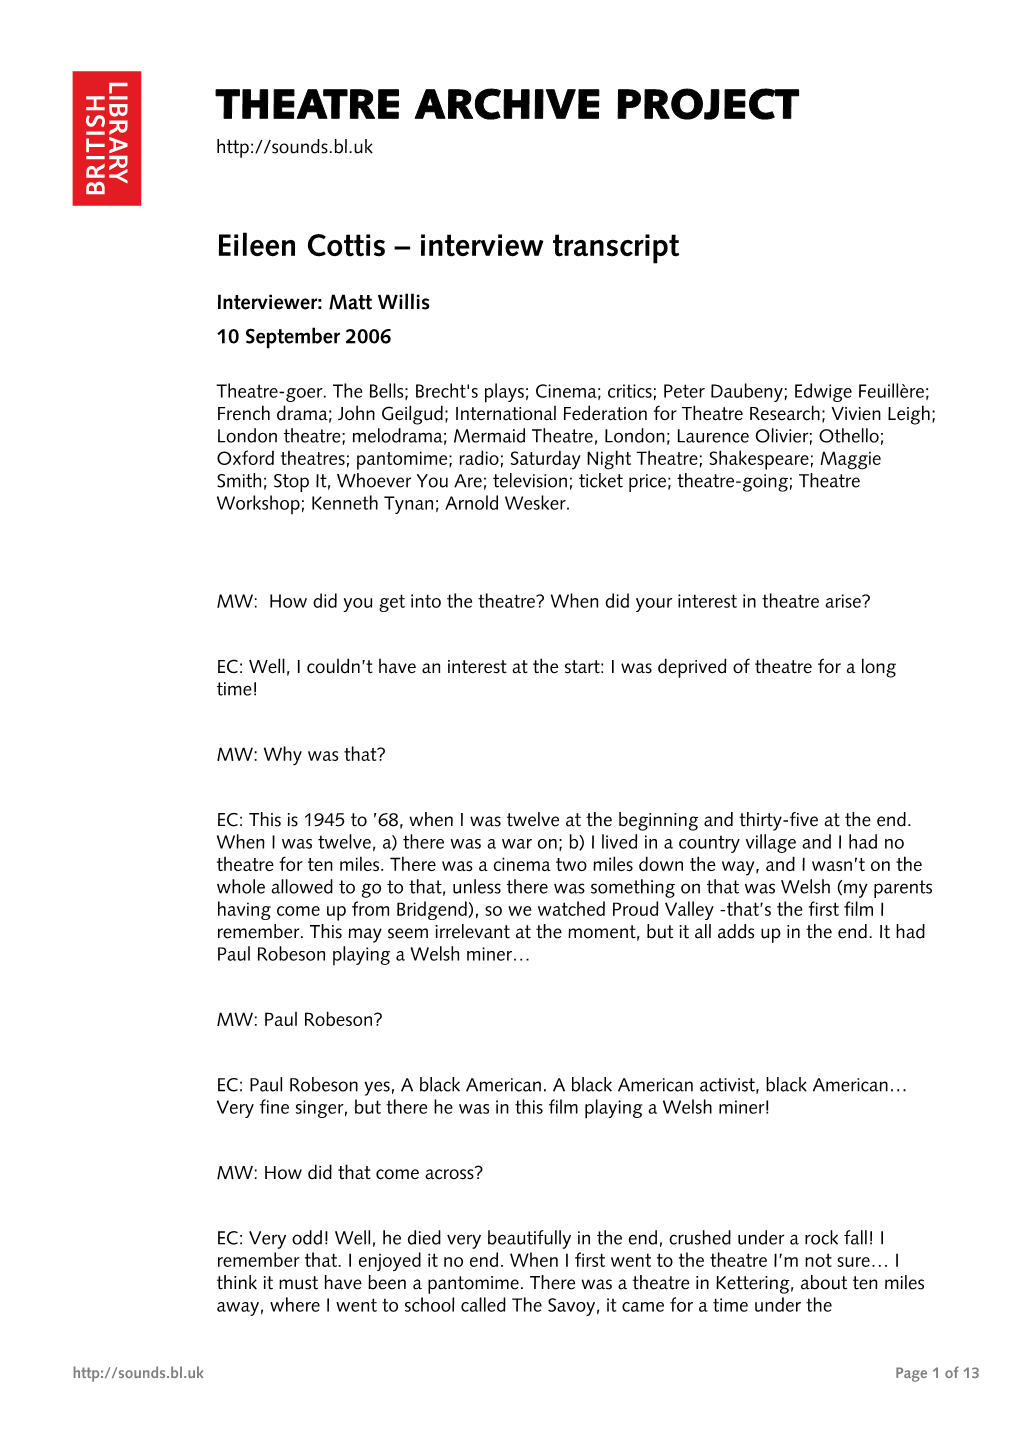 Interview with Eileen Cottis